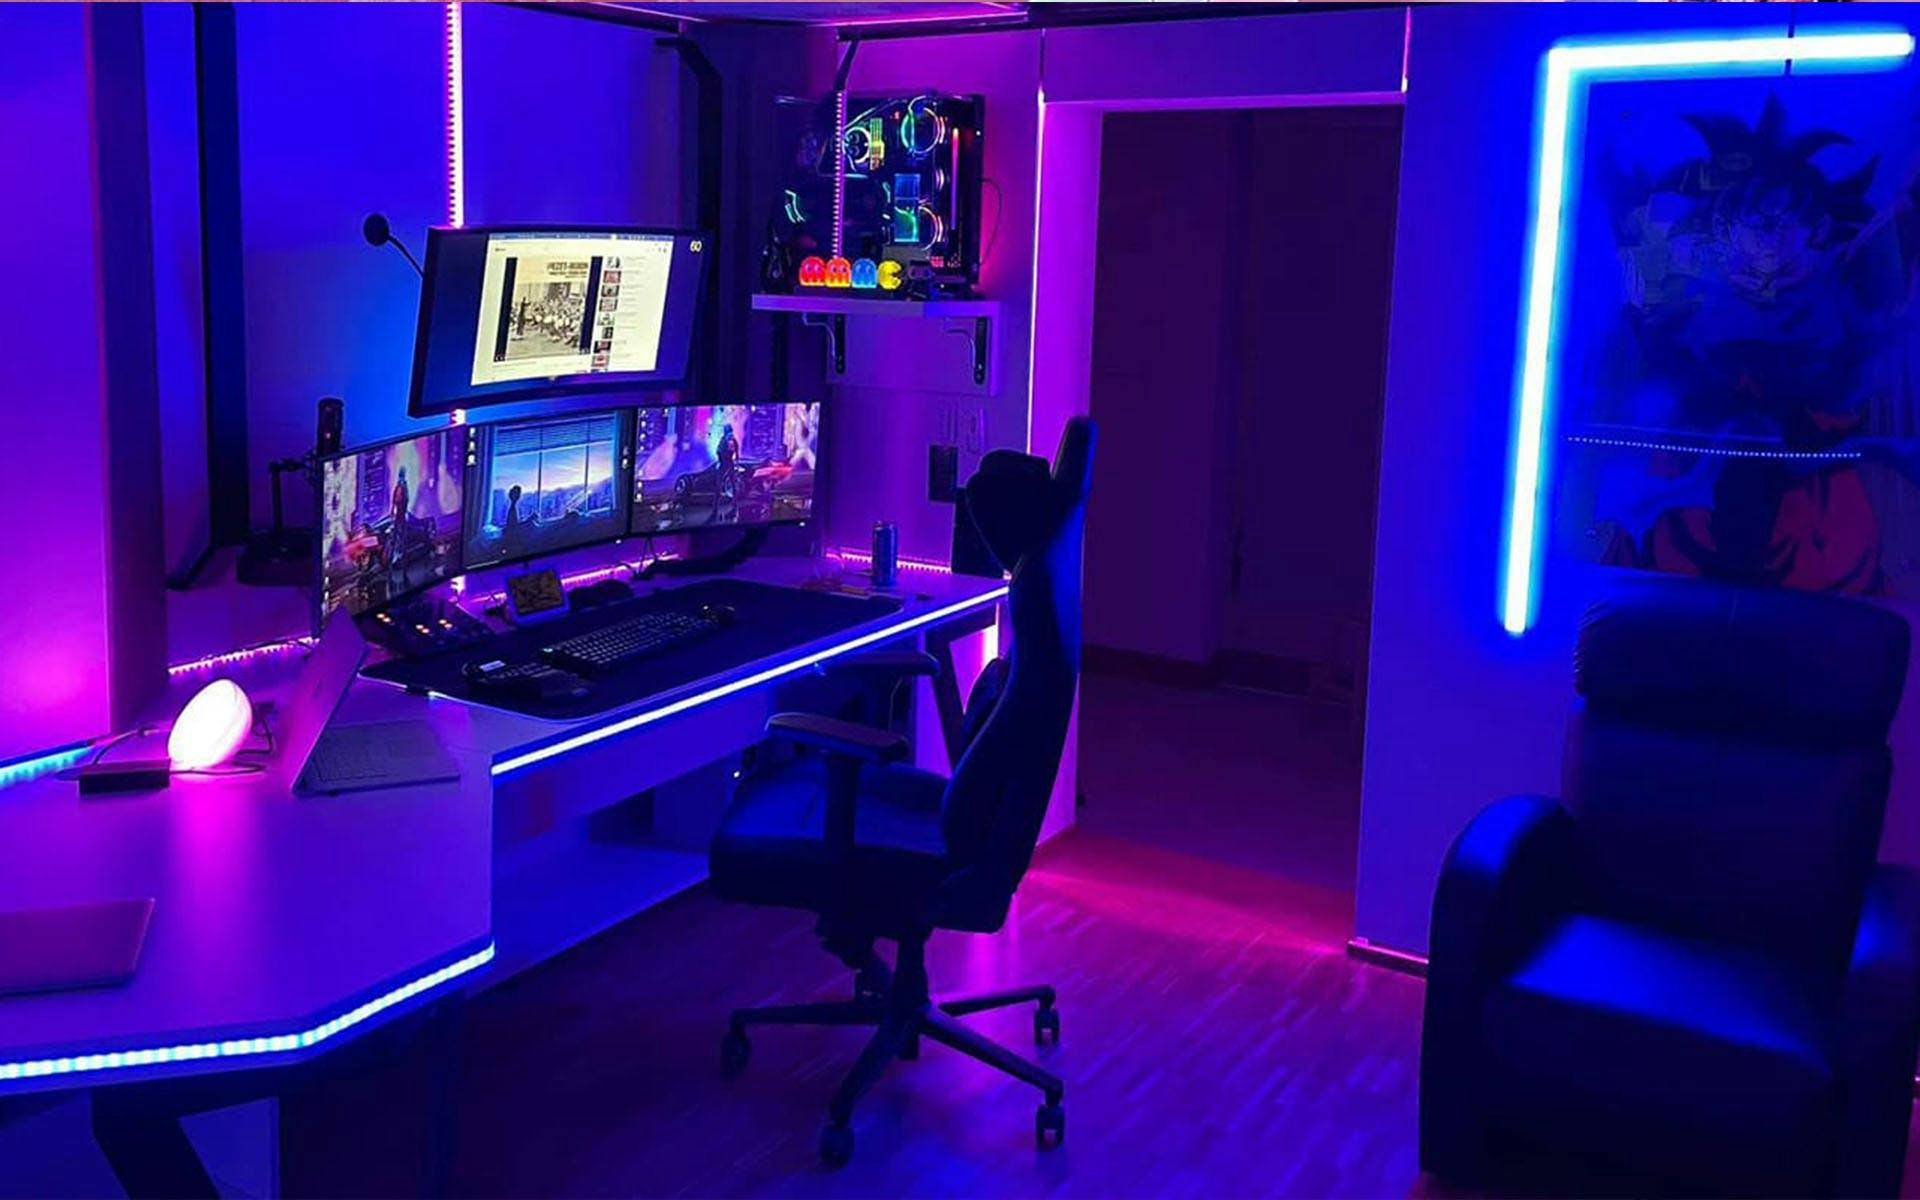 A simple room can create wow effects with just a little LED use | Credit: KRL Gaming Art